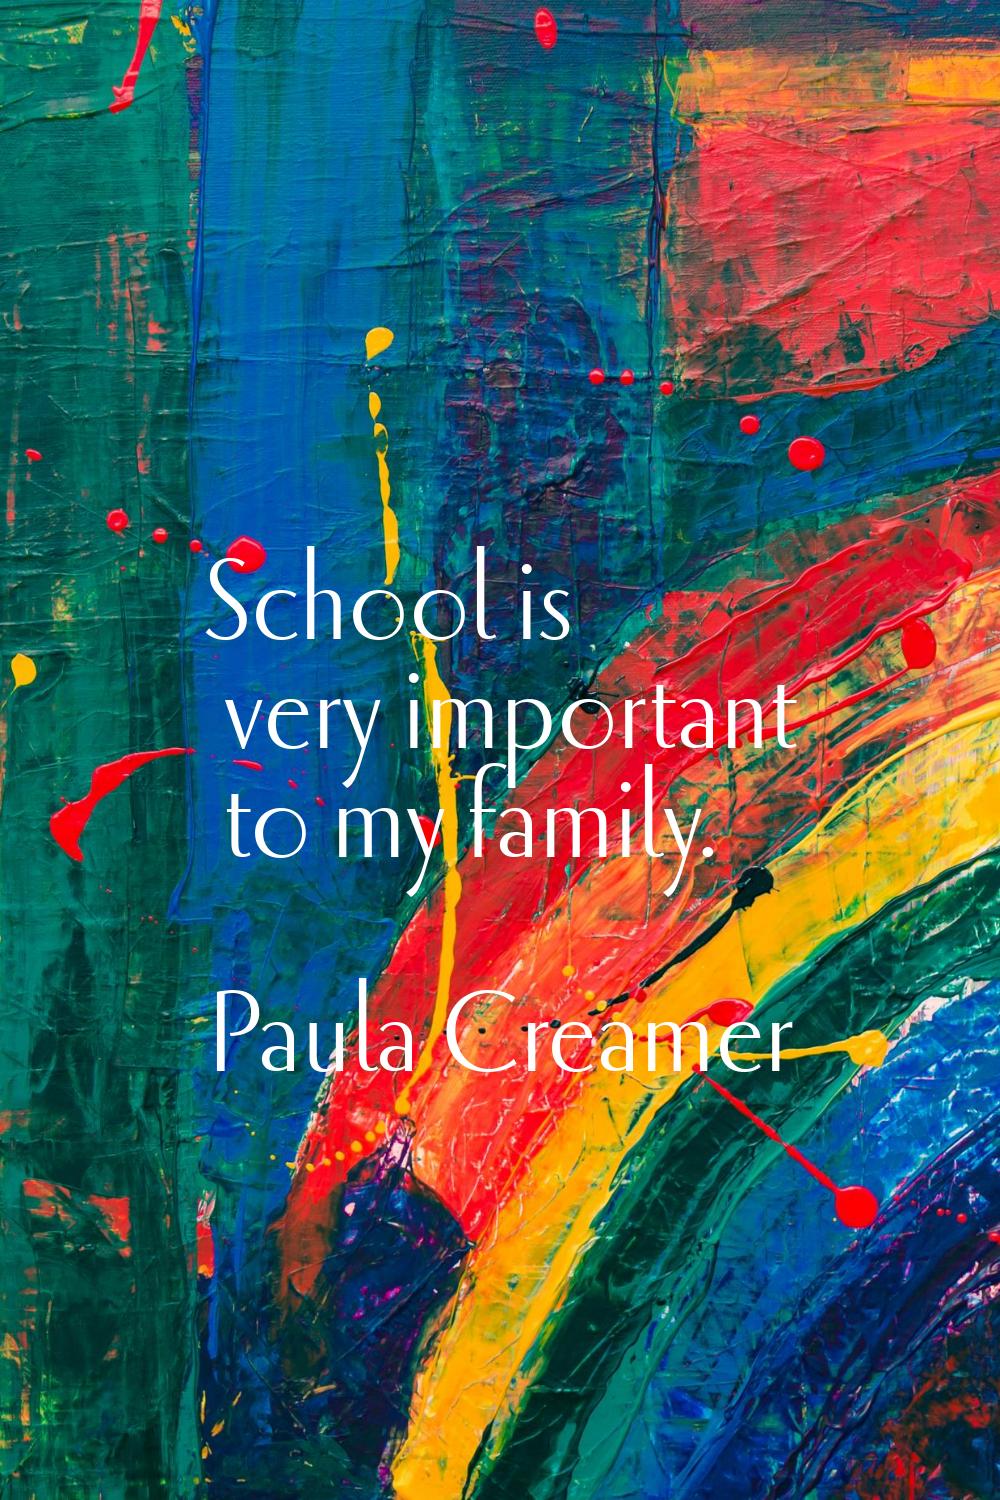 School is very important to my family.